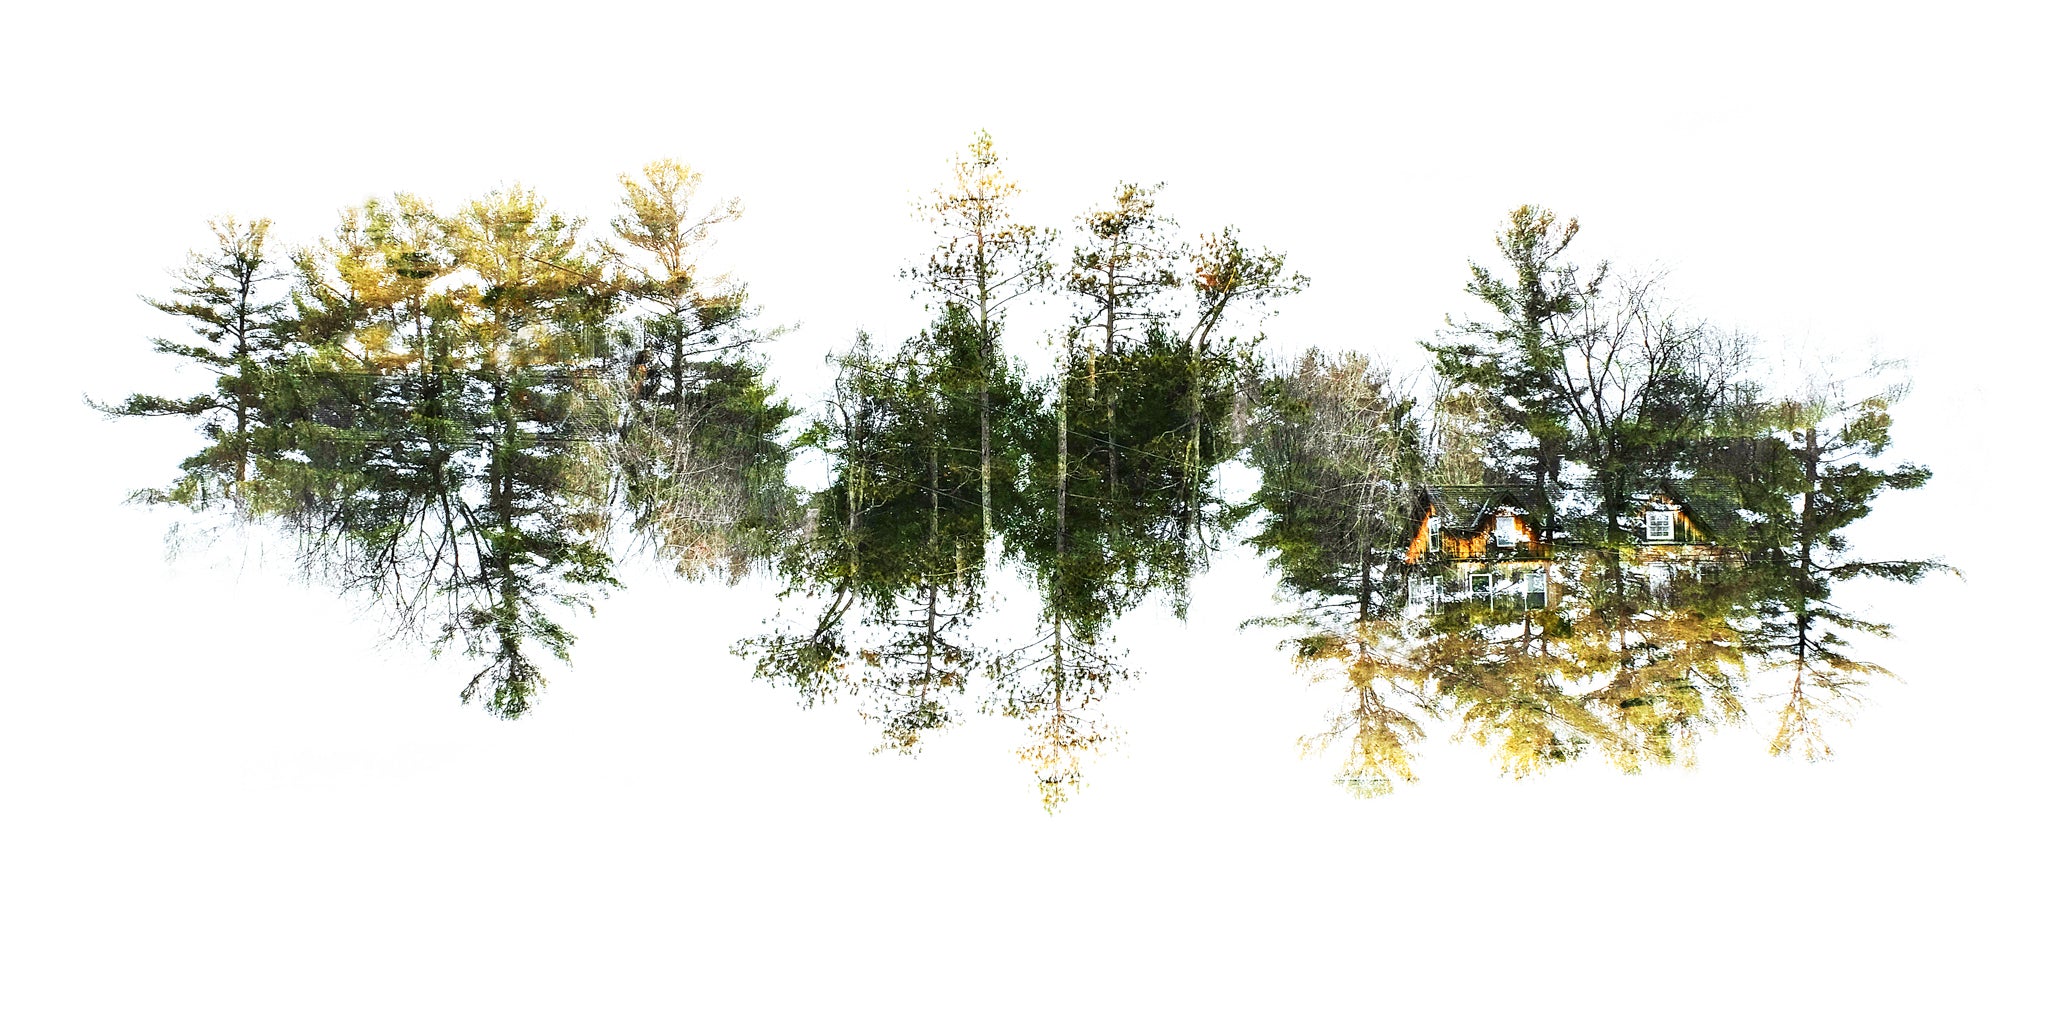 'Hiding Place' - Inverted Double Exposure